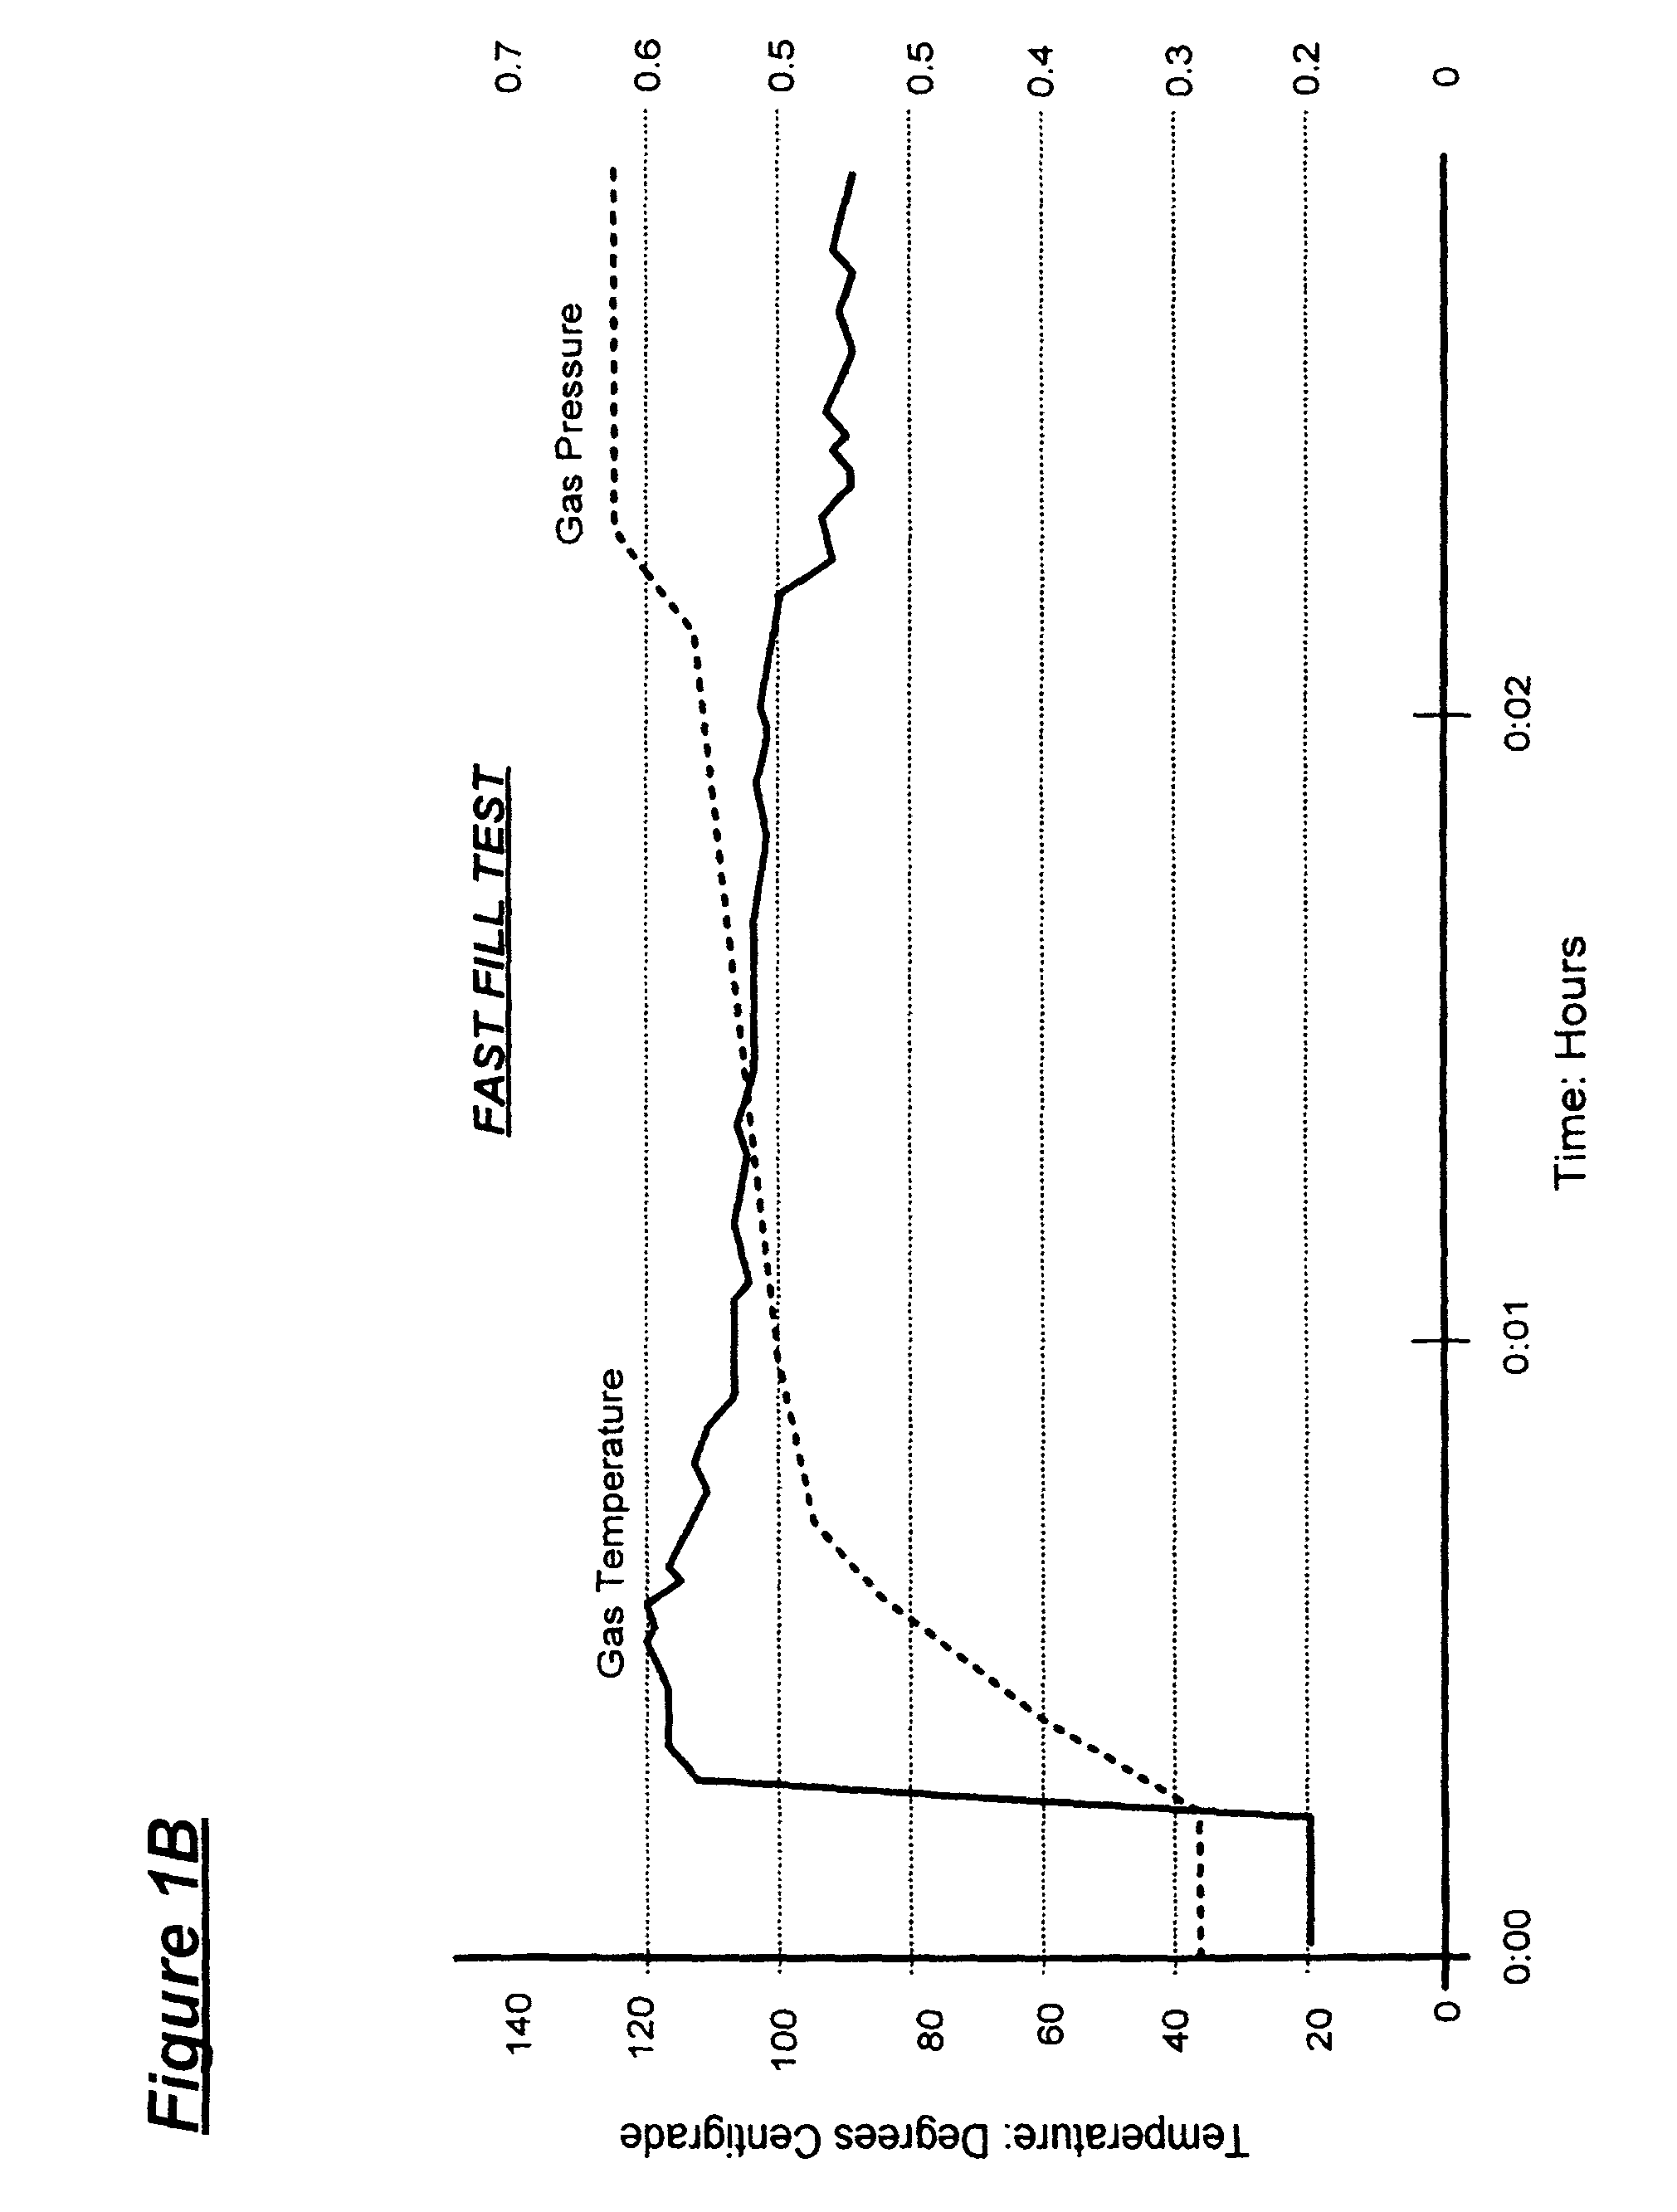 System for enhancing the efficiency of high pressure storage tanks for compressed natural gas or hydrogen